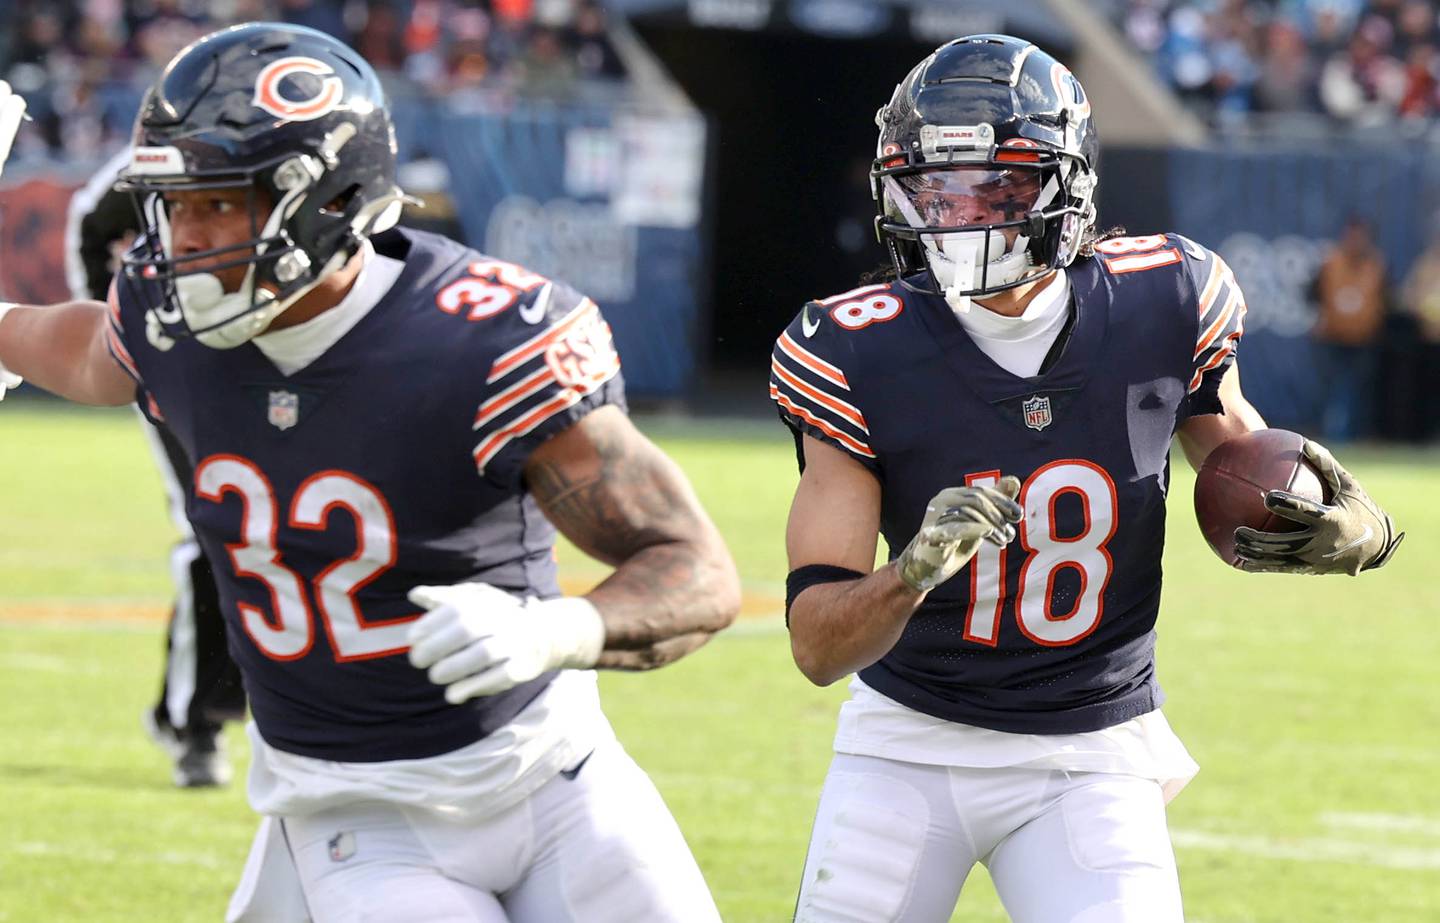 Chicago Bears wide receiver Dante Pettis follows the blocking of running back David Montgomery on a jet sweep during their game Sunday, Nov. 13, 2022, at Soldier Field in Chicago.